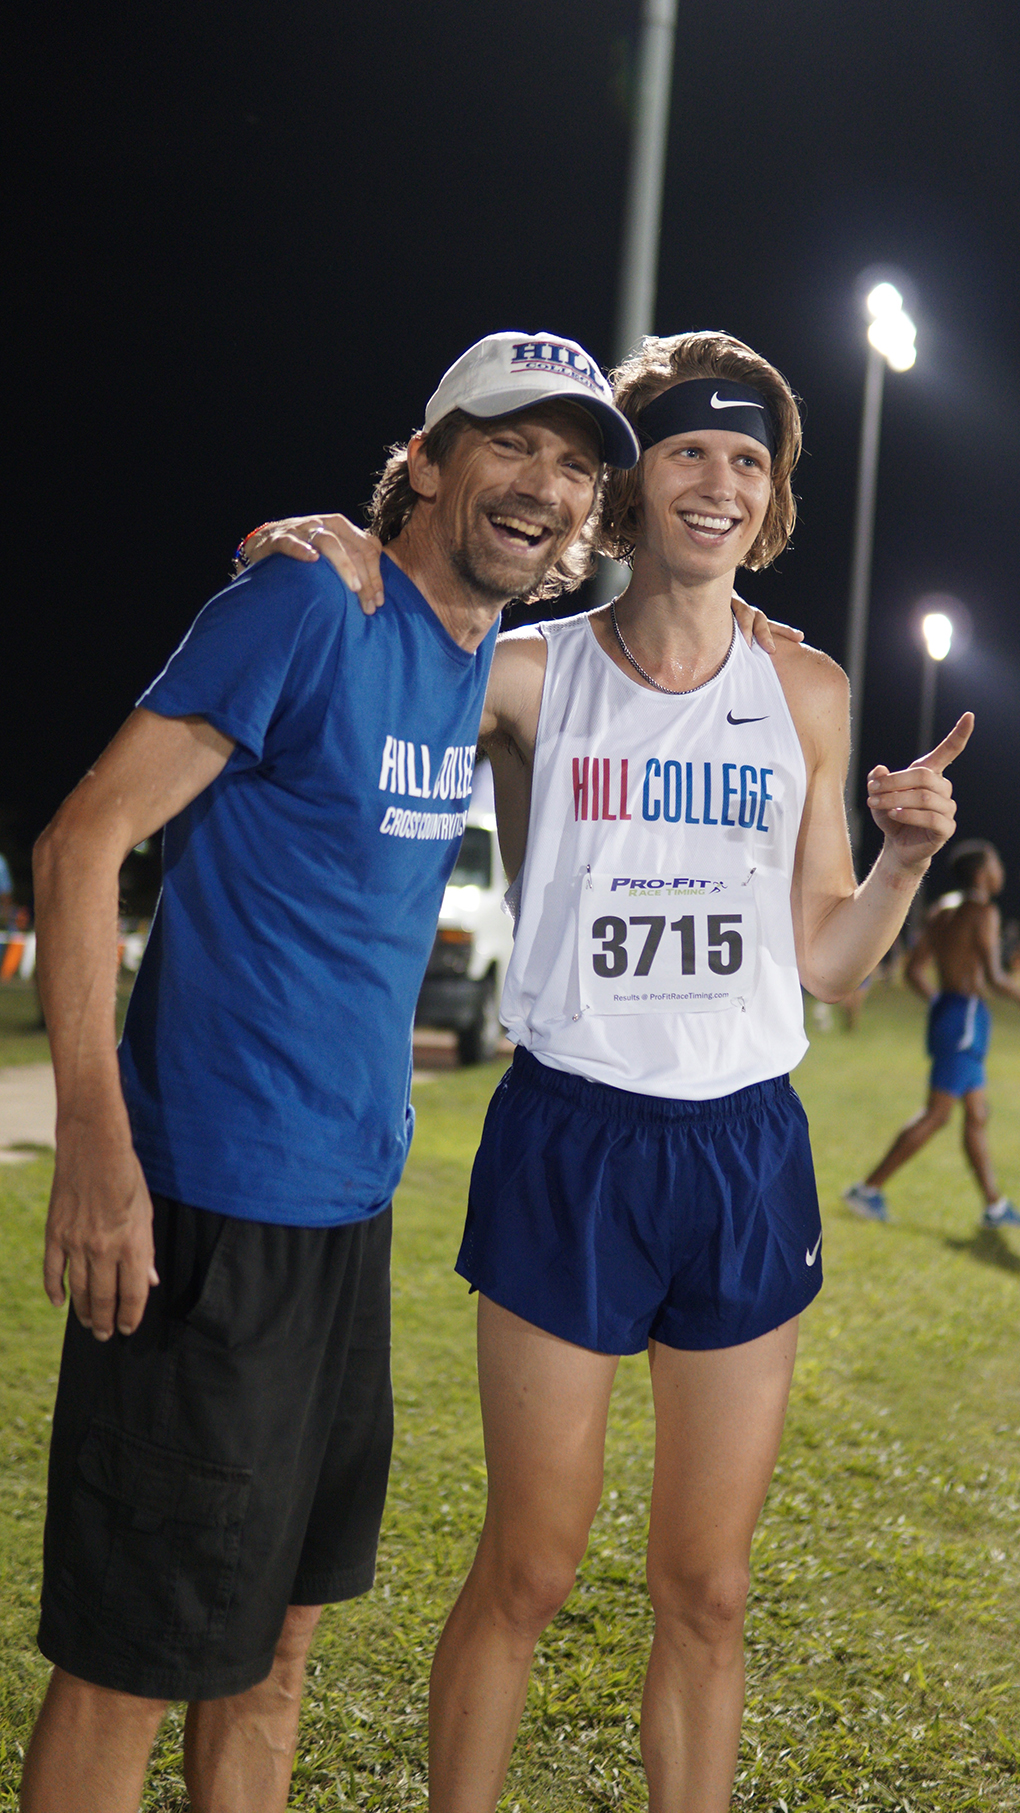 Hill College Cross Country Runner Jared Lautenslager with Coach Lautenslager